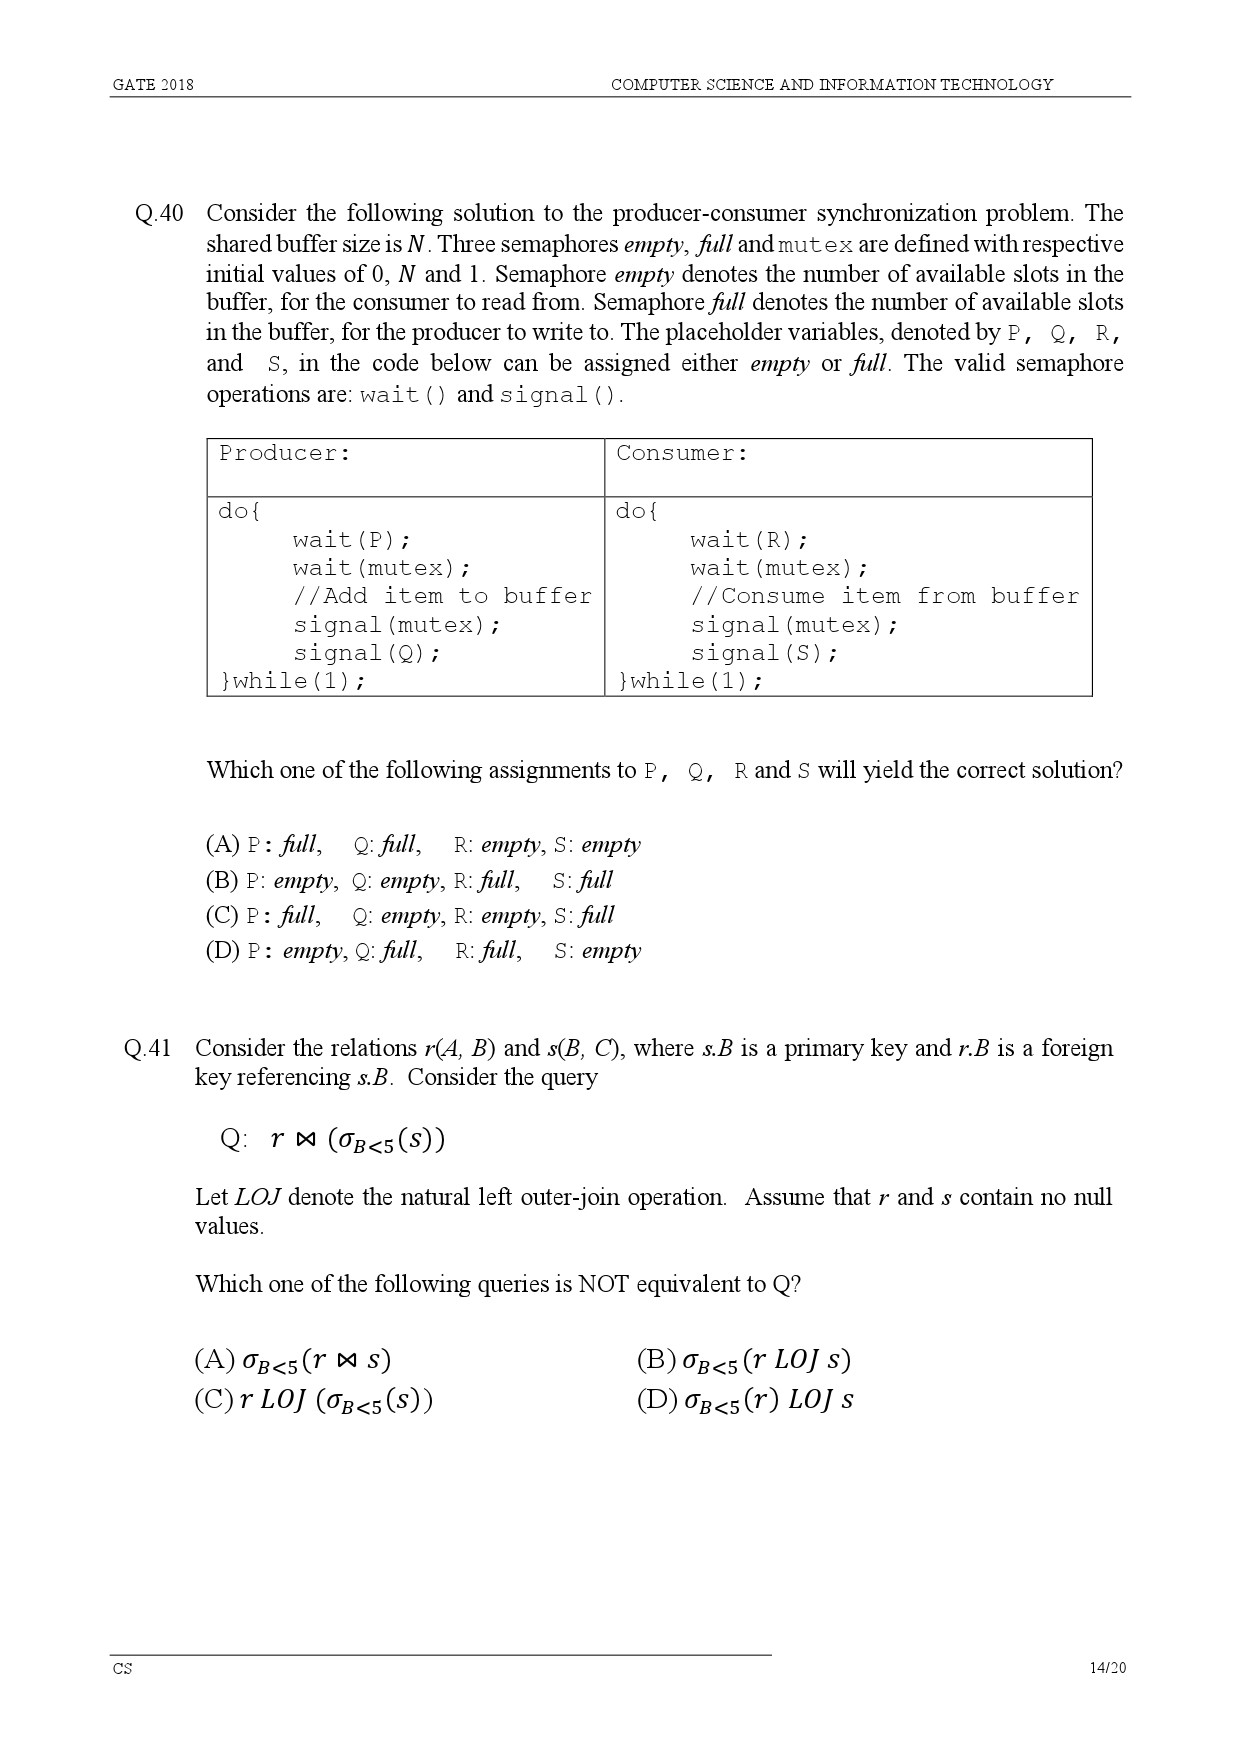 GATE Exam Question Paper 2018 Computer Science and Information Technology 17